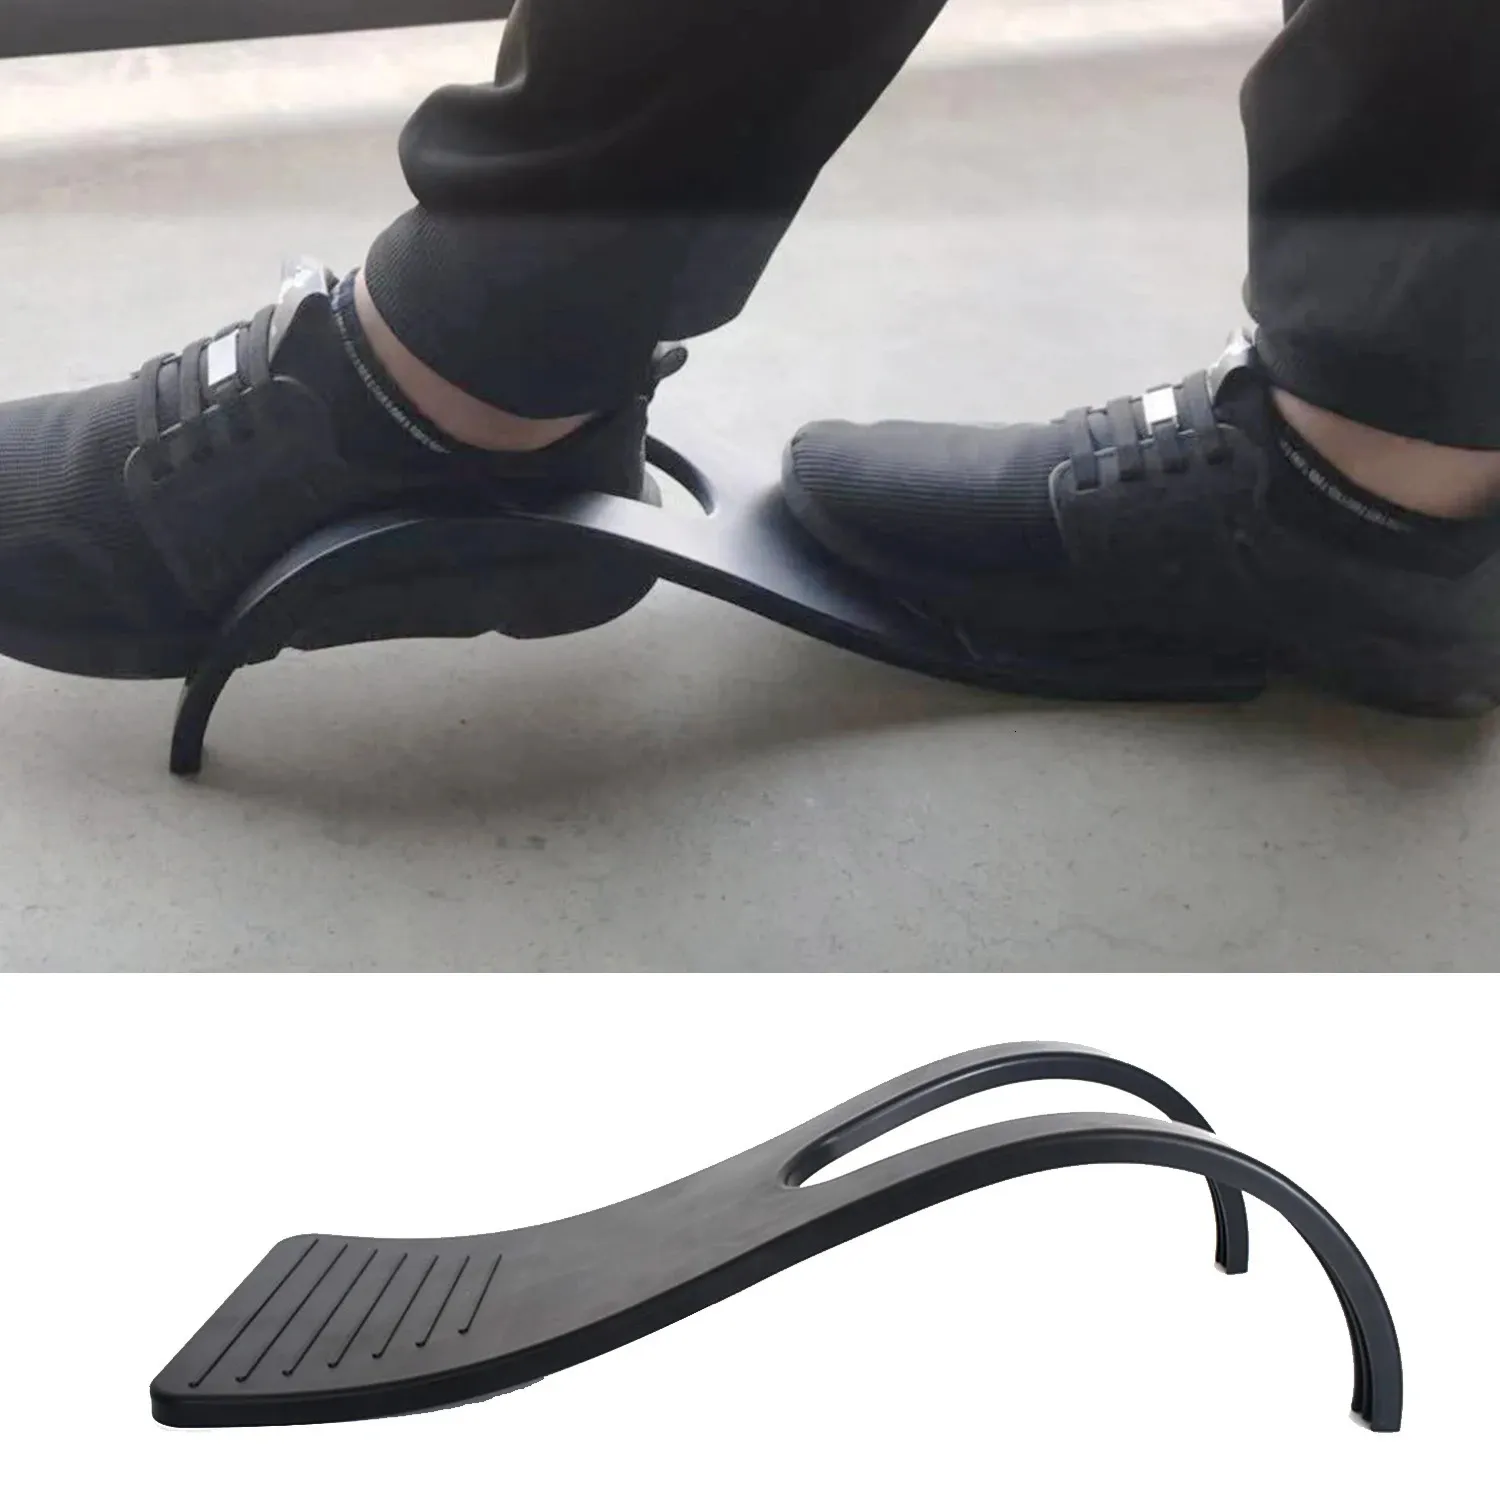 Portable Boot Puller Shoes Remover Gravid Women Helper Assist Device Accessories Lazy Shoe Tool 231221